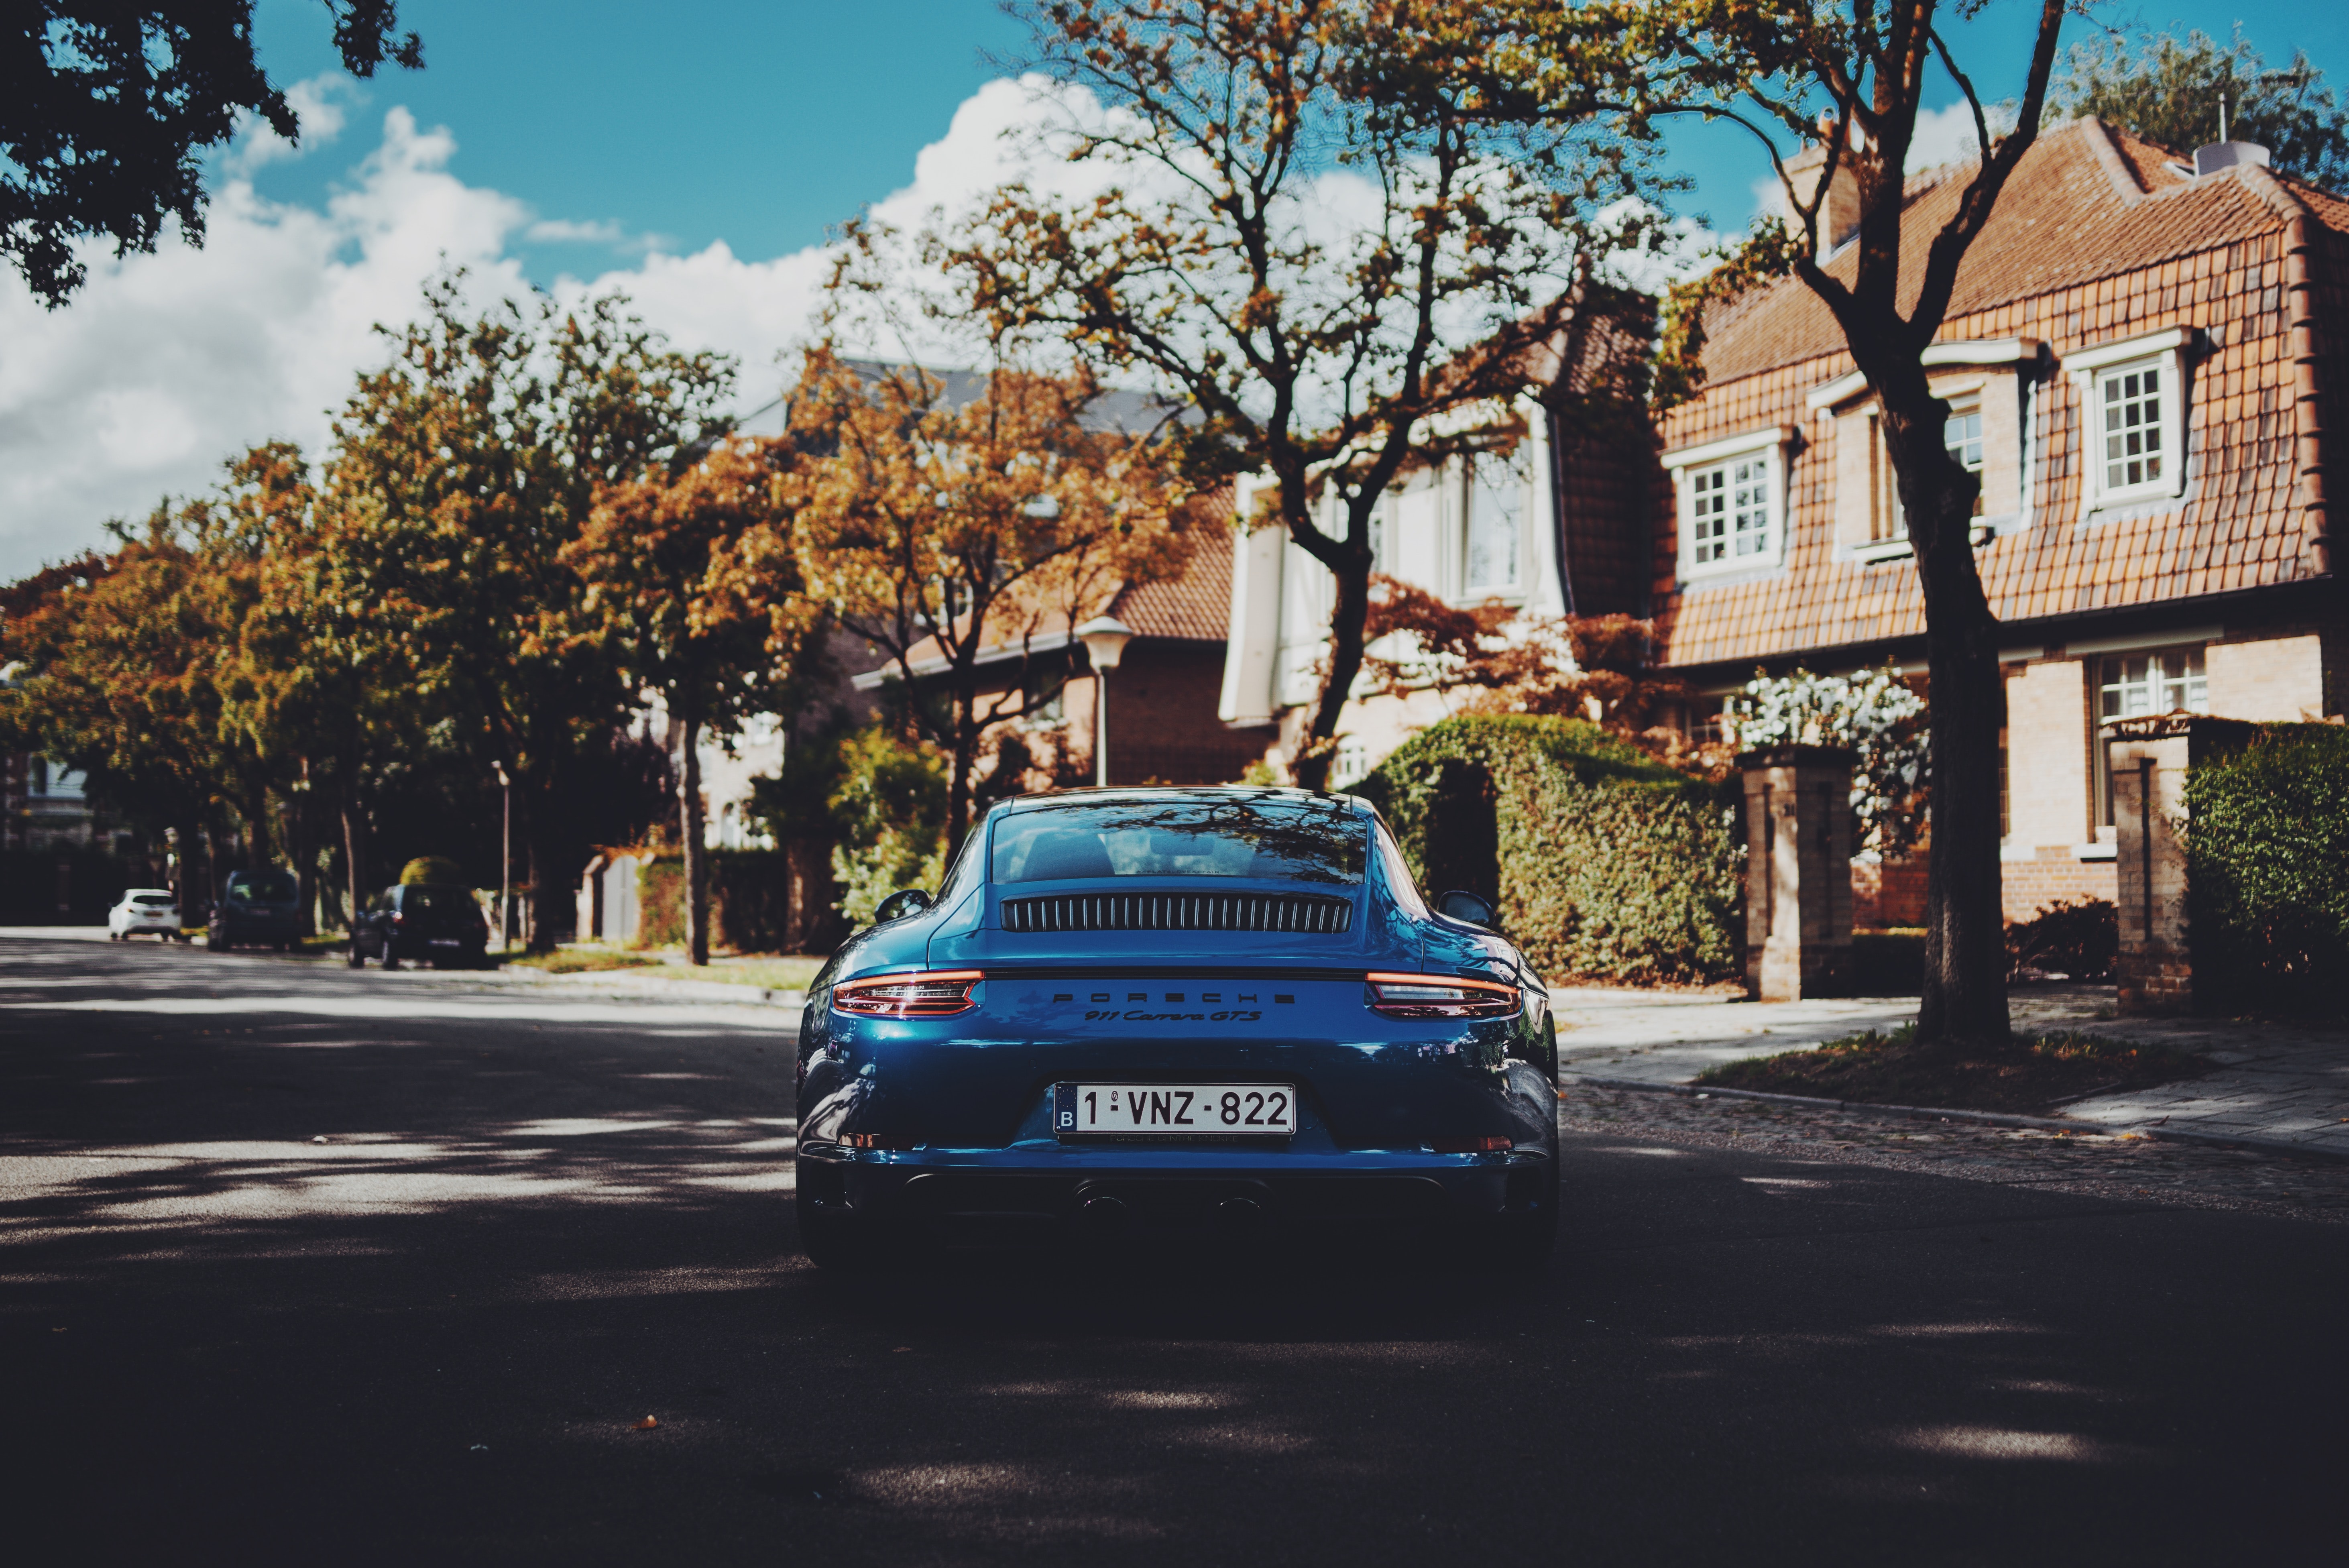 porsche, sports car, cars, rear view, back view, sports High Definition image